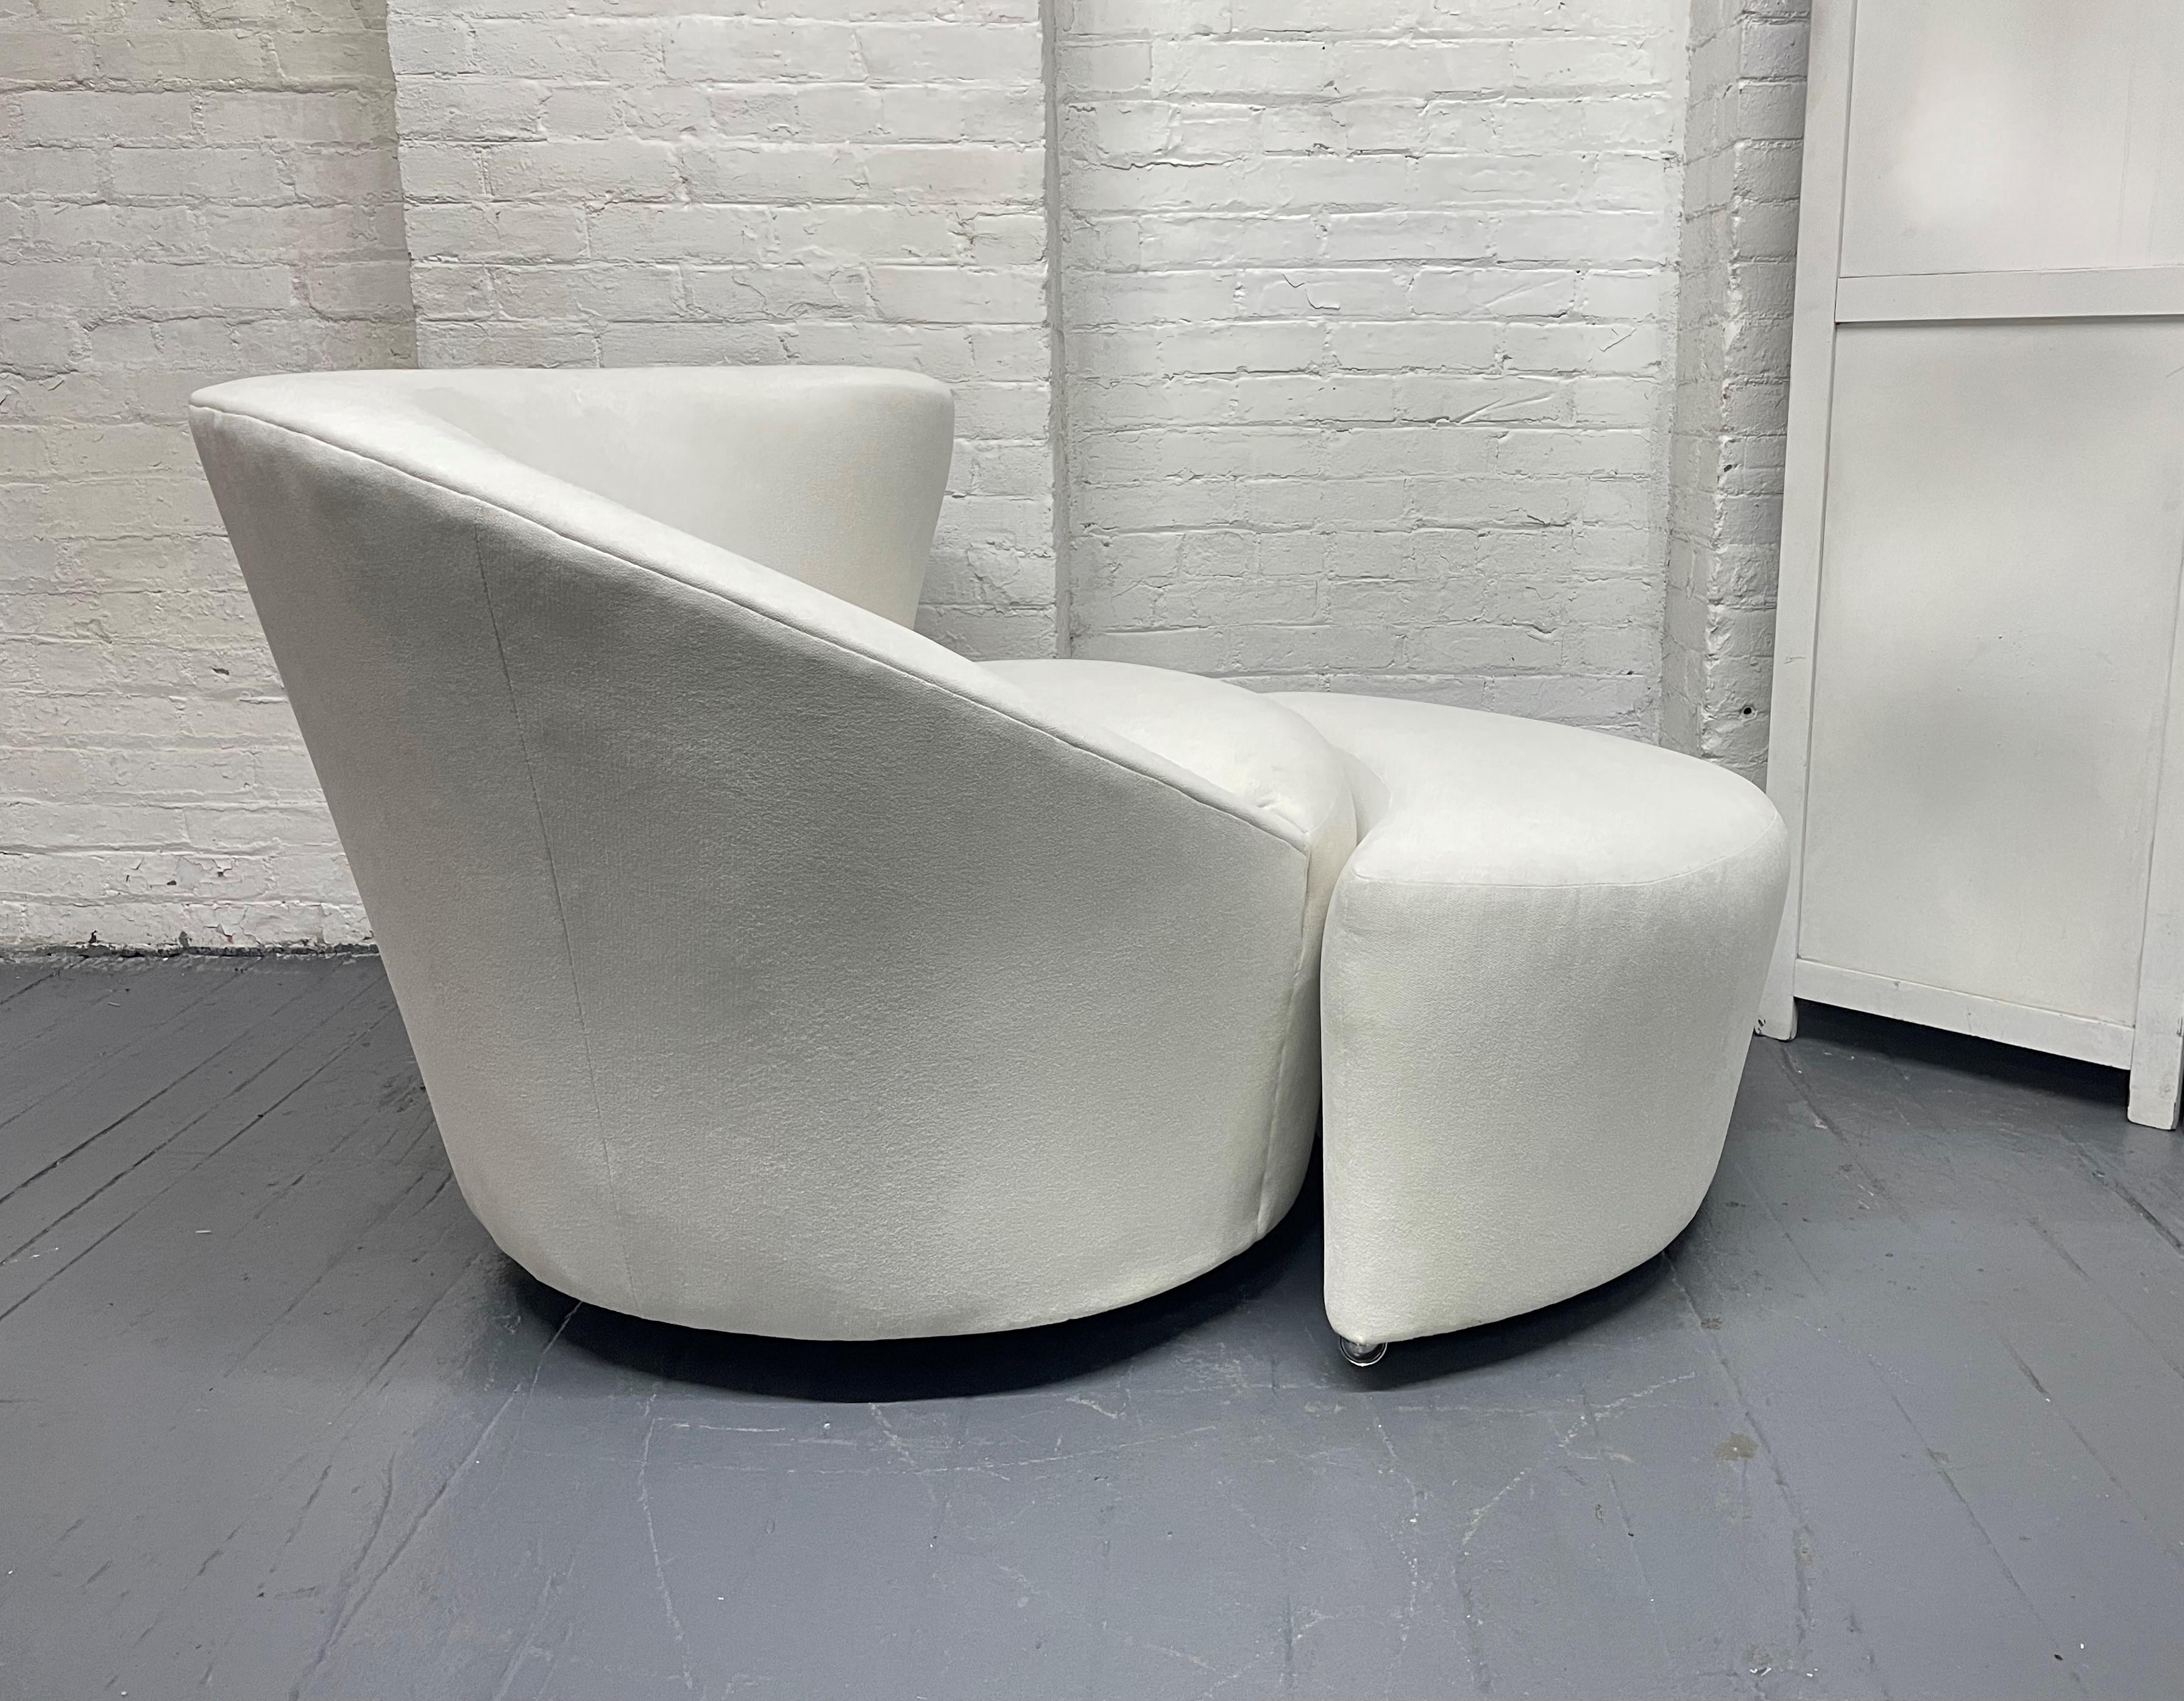 Two pairs of asymmetrical swivel lounge chairs and matching ottomans. The chairs are in the style of the Nautilus chairs. The chairs and ottomans are newly upholstered. The ottomans have casters.

Chairs measures: 29 H x 34 W x 34 D.
Ottomans